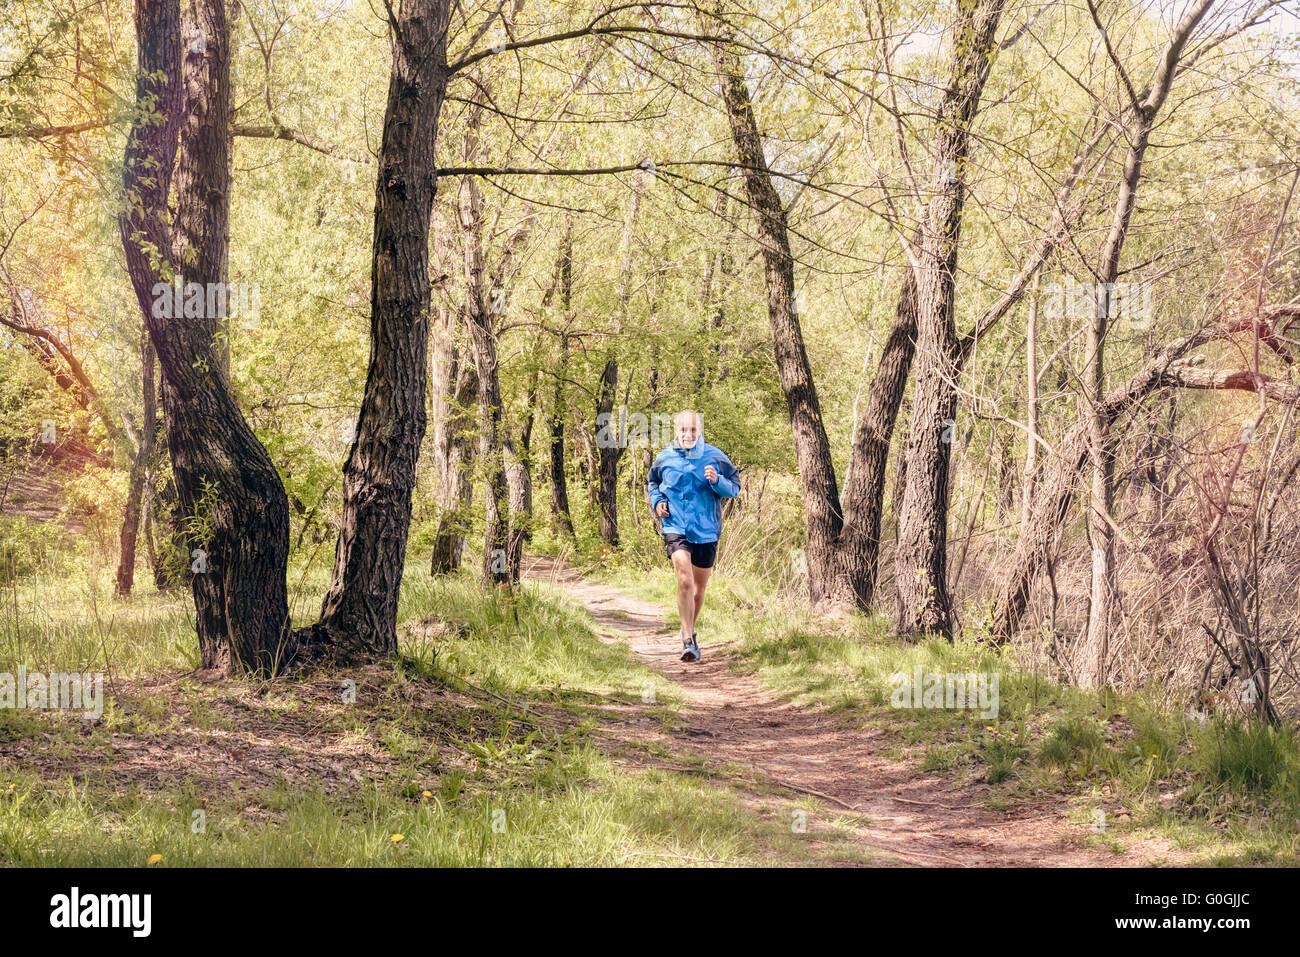 A senior man worn in black and blue is running in the forest, during a warm spring day Stock Photo